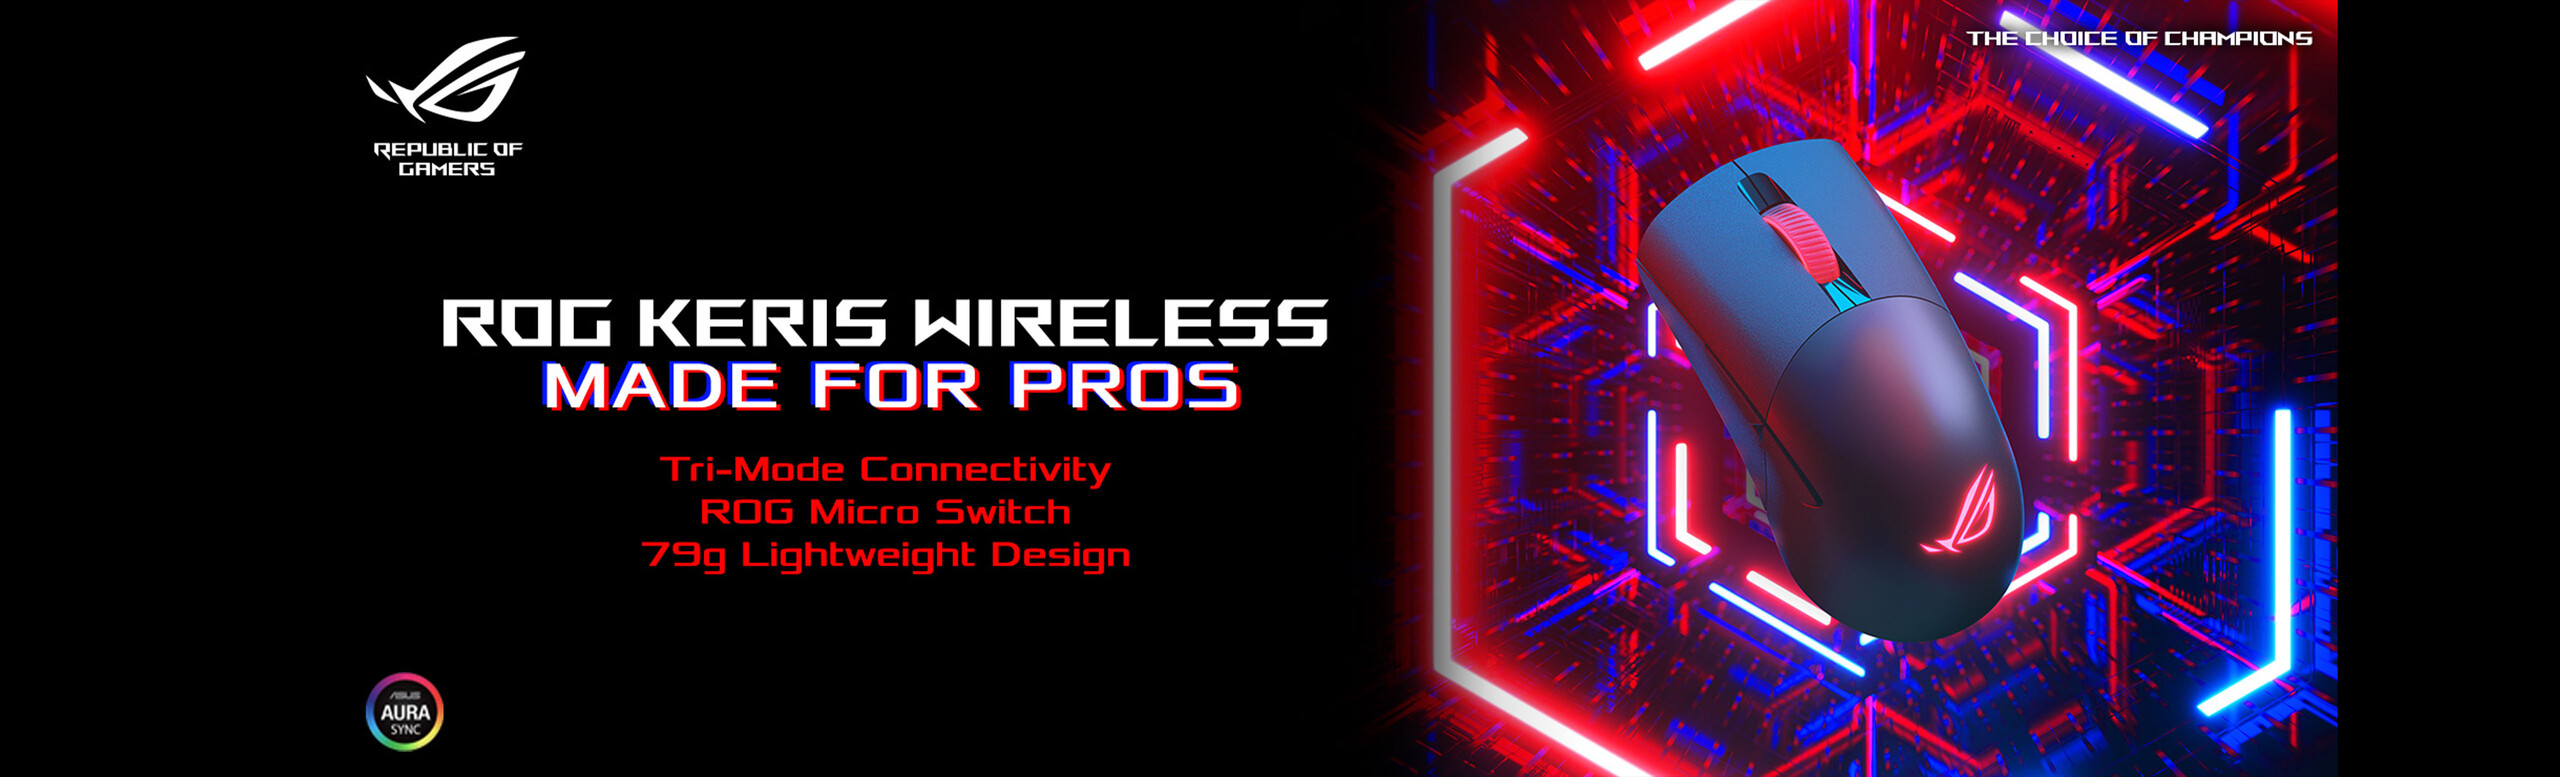 ROG Keris Wireless - Lightweight FPS wireless gaming mouse with tri-mode connectivity